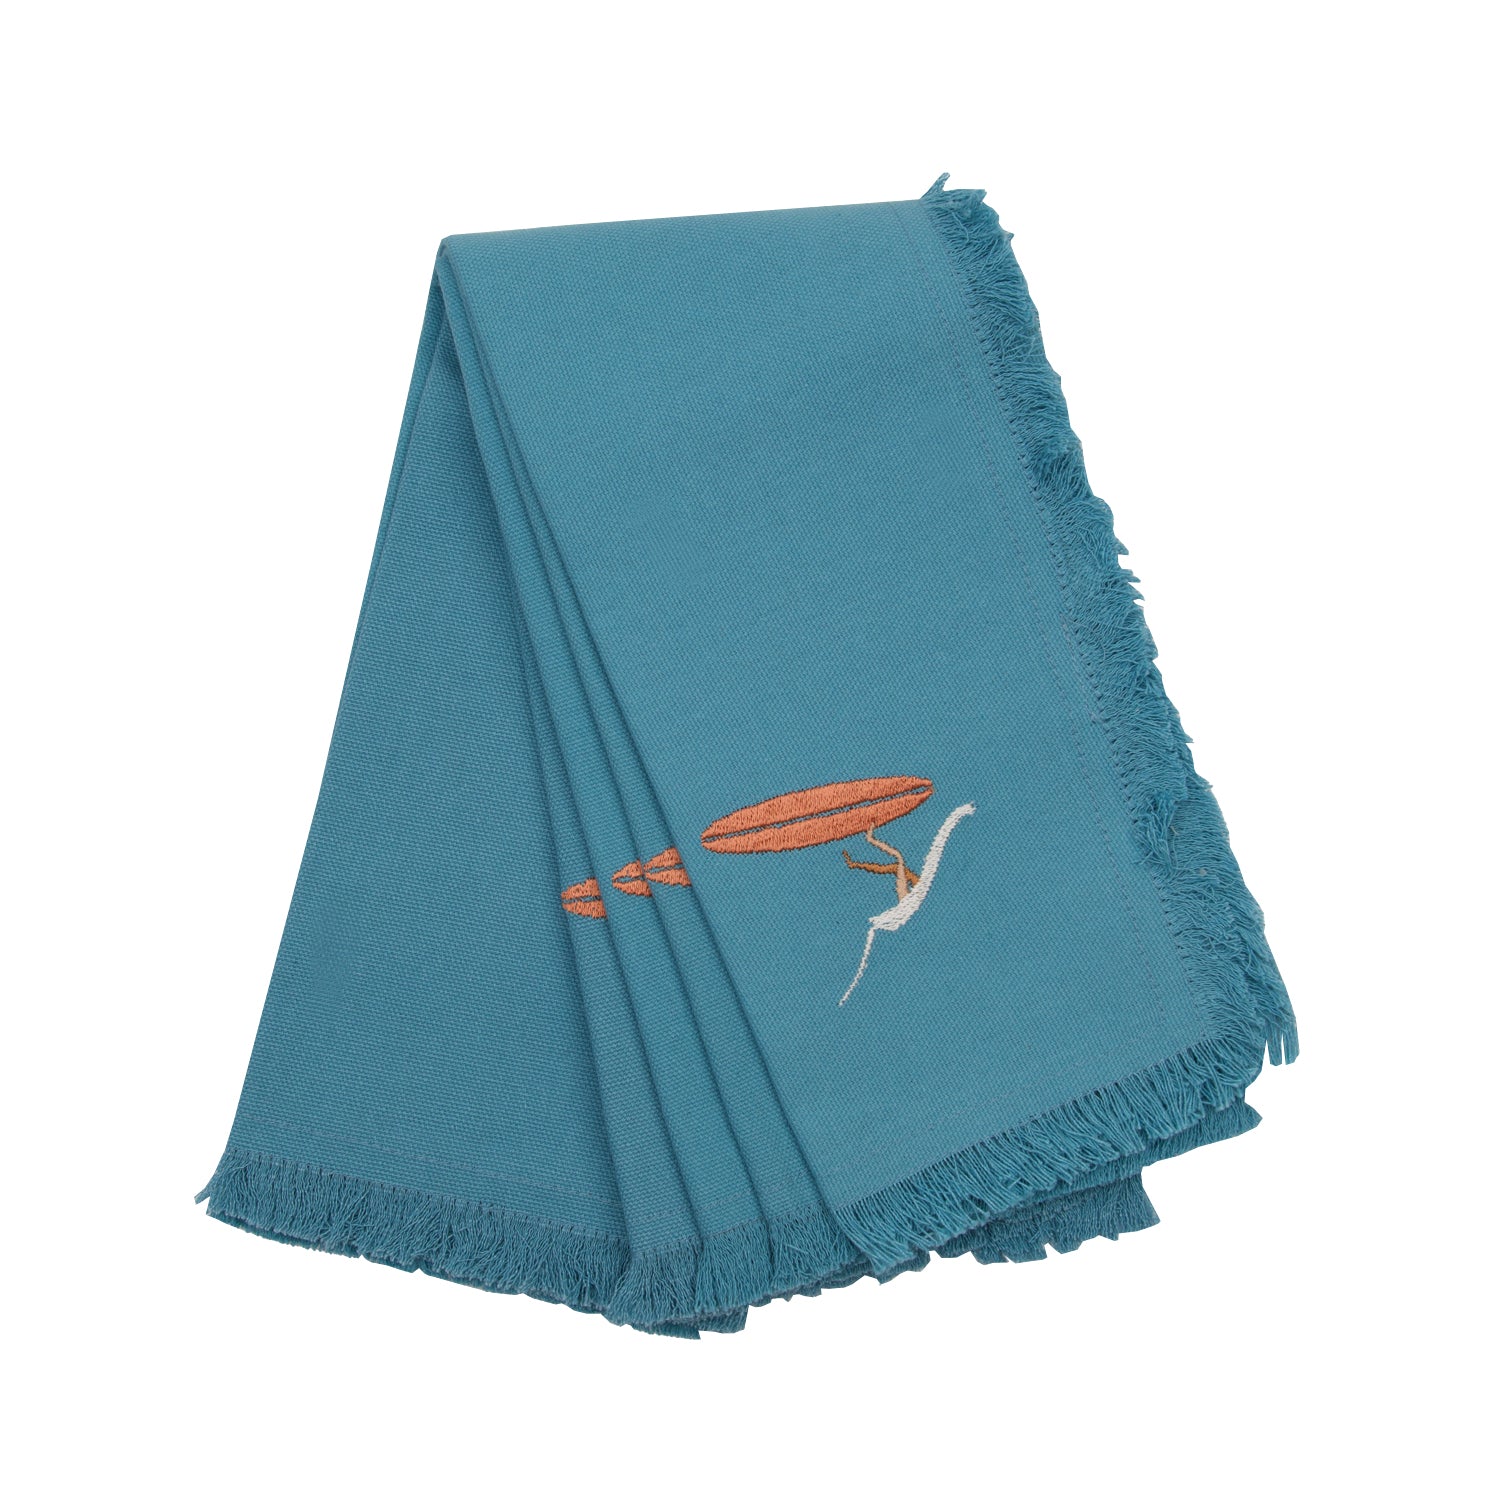 embroidered napkins in a cool coastal blue featuring fringed edges. Multicolored embroidery scene with a bird’s eye view of a surfer falling off his board into  the waves.